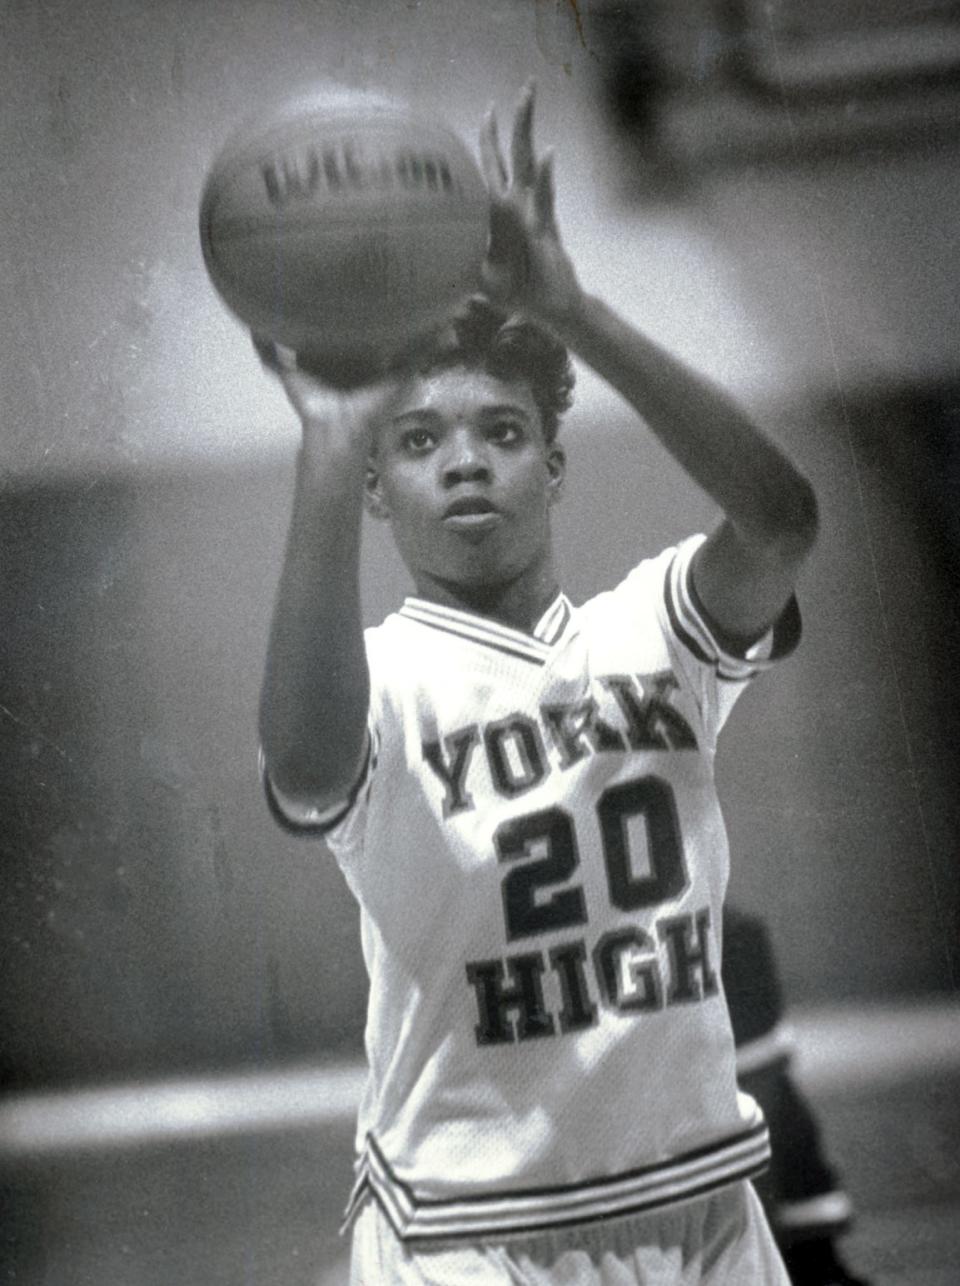 William Penn High star Barb DeShields pulls up on a shot during her playing days in the late 1980s.